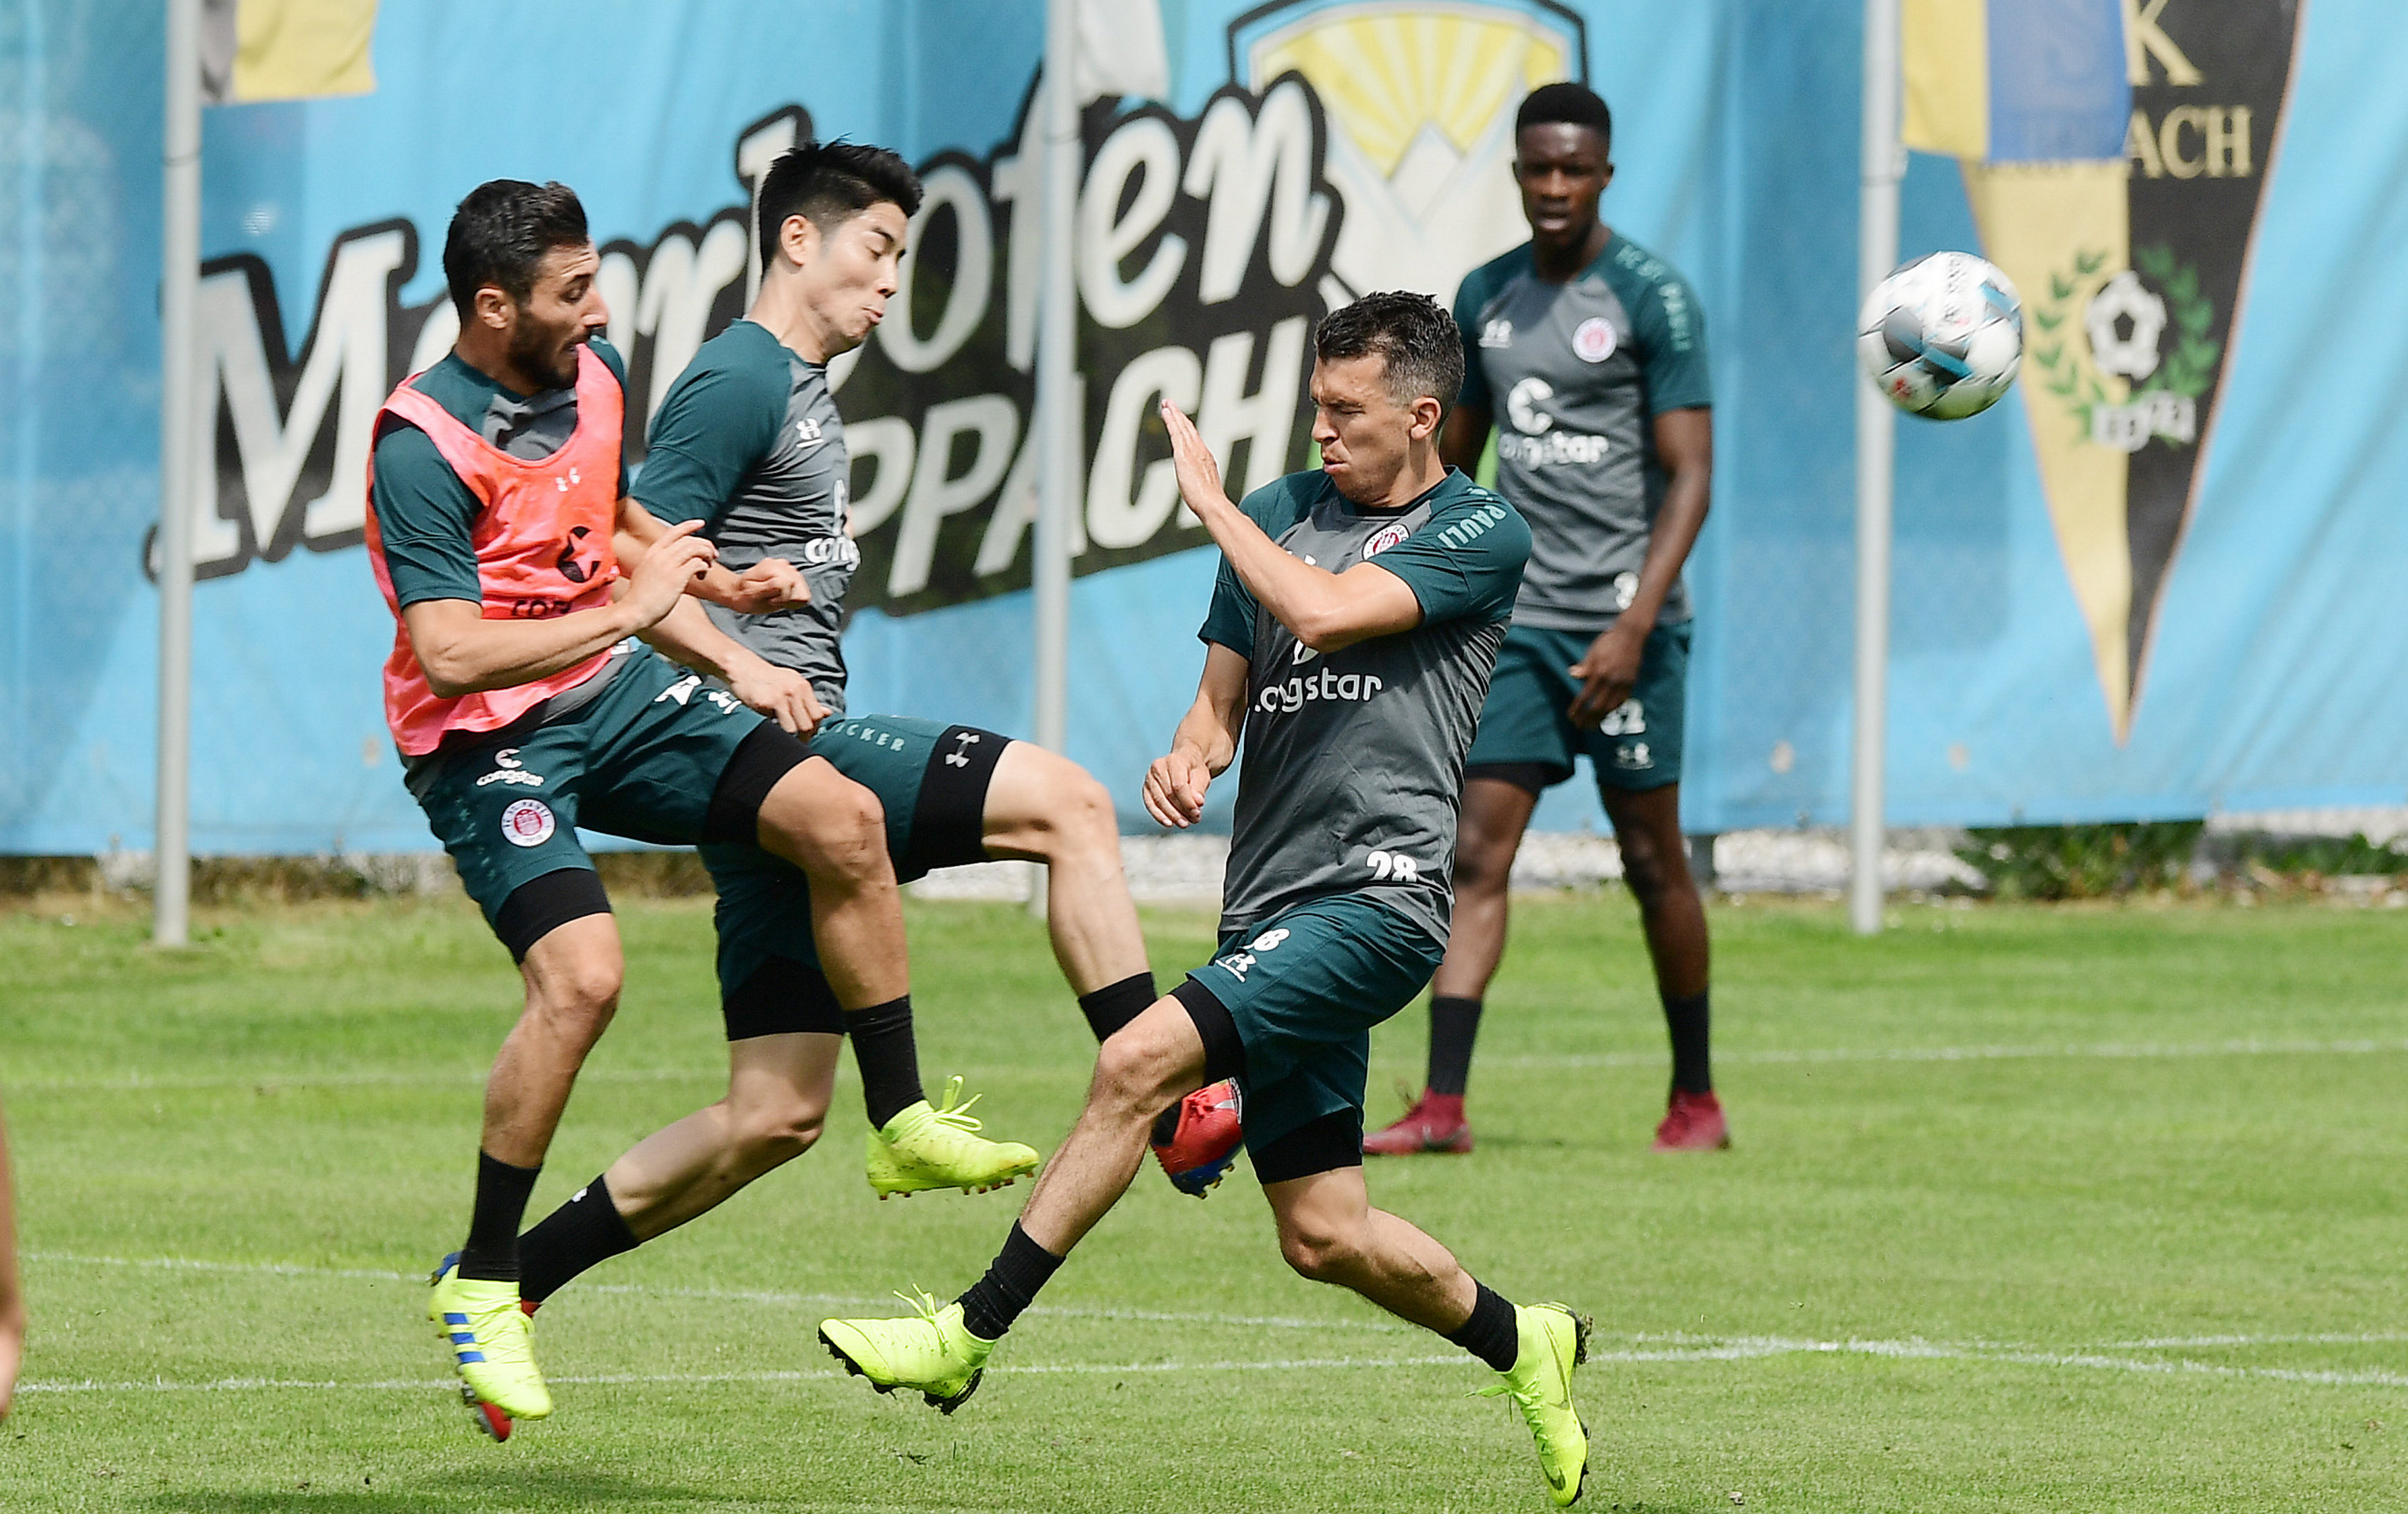 Flat out at the Austrian training camp - Cenk Sahin challenges for the ball with Yiyoung Park and Waldemar Sobota.